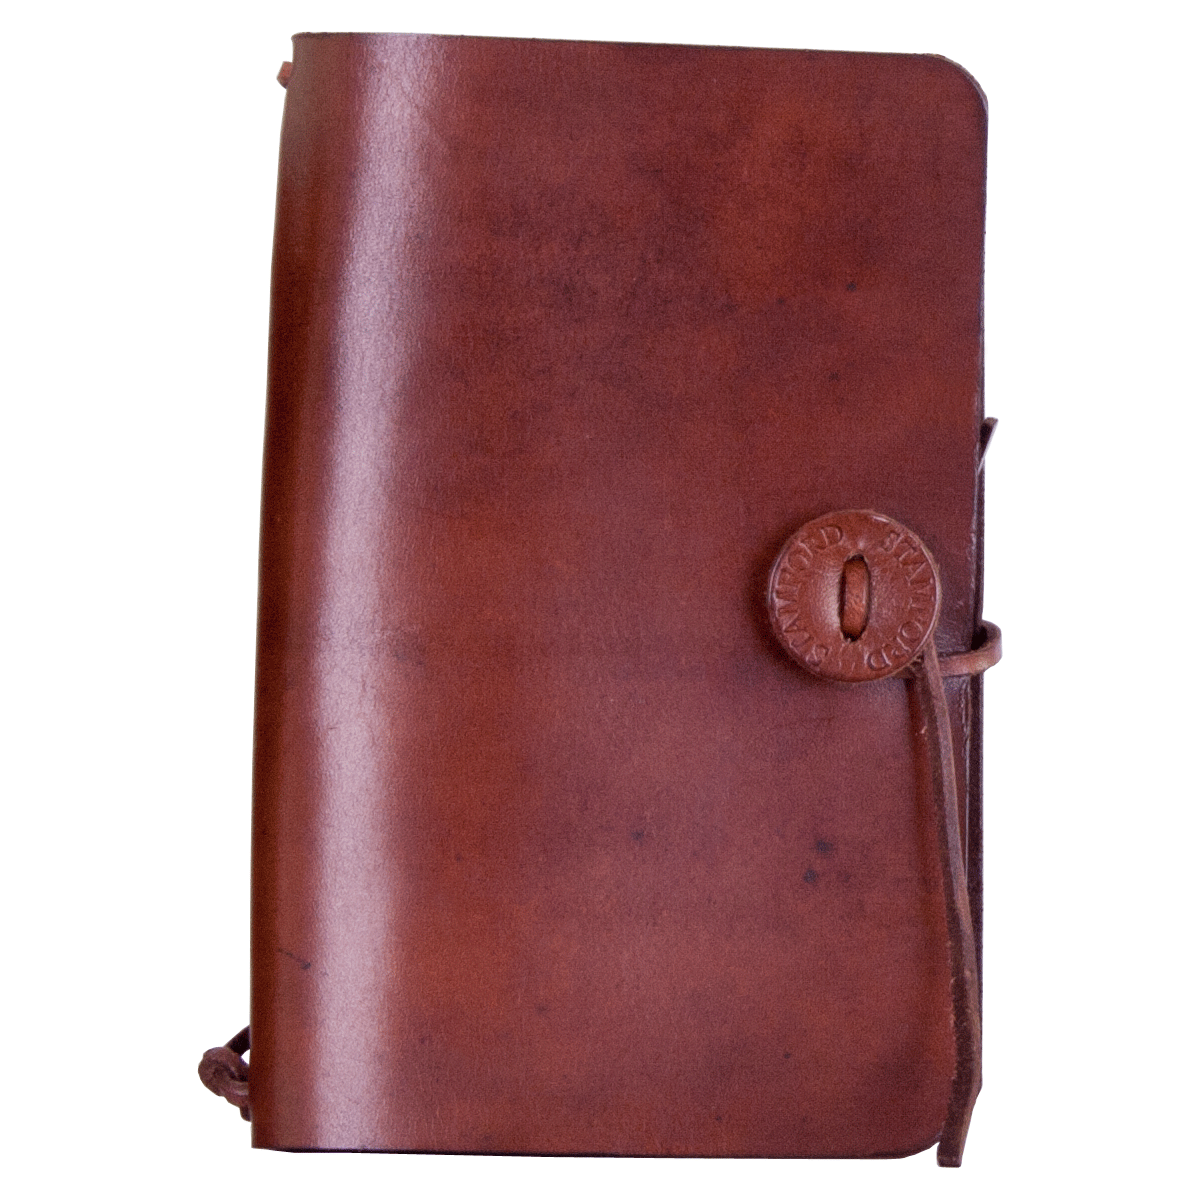 Pocket Traveller Mid Brown, part of the Luxury Leather Travel Set